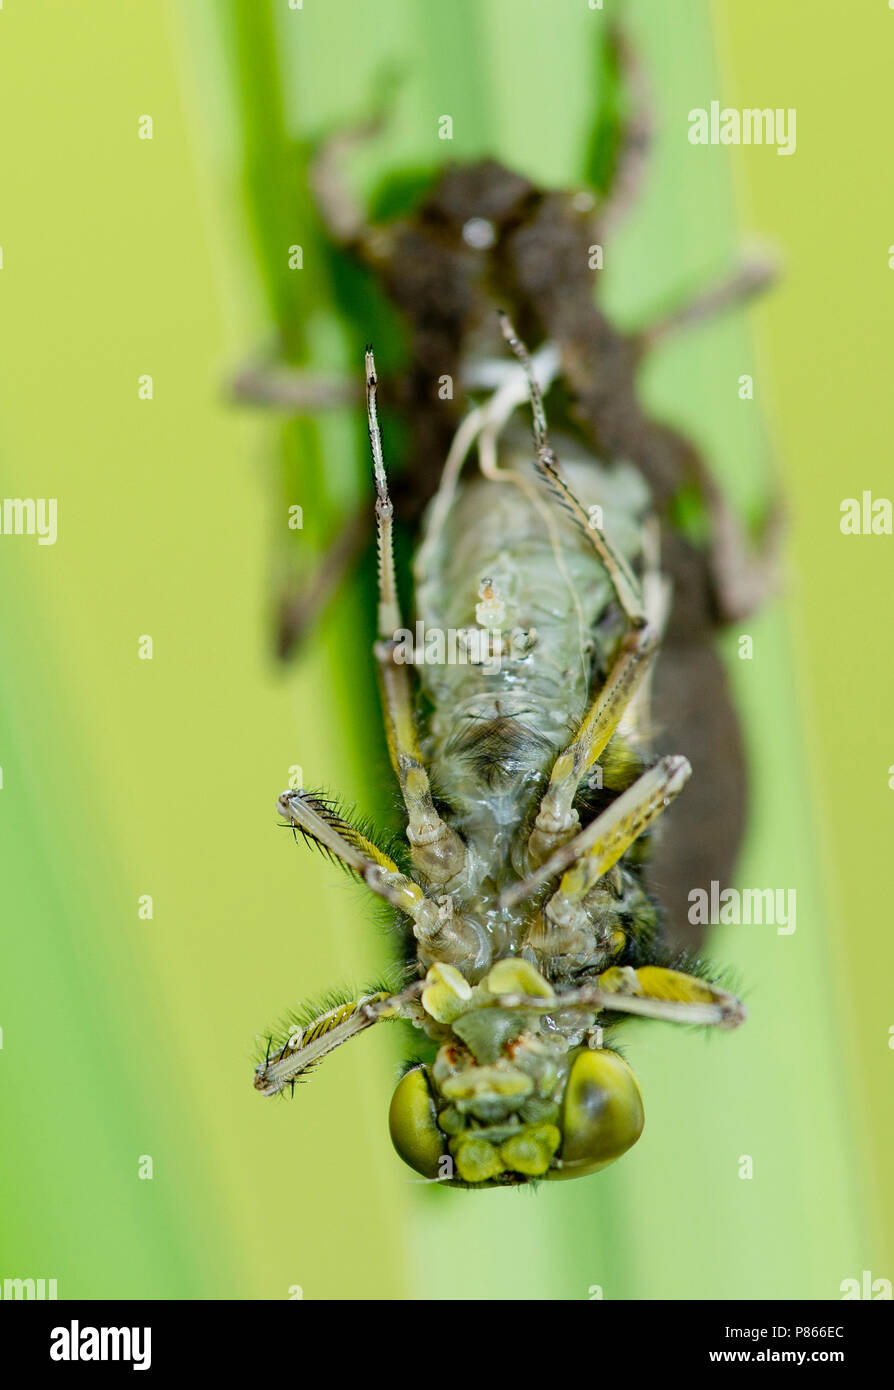 Uitsluipende libel, Molting dragonfly Stock Photo